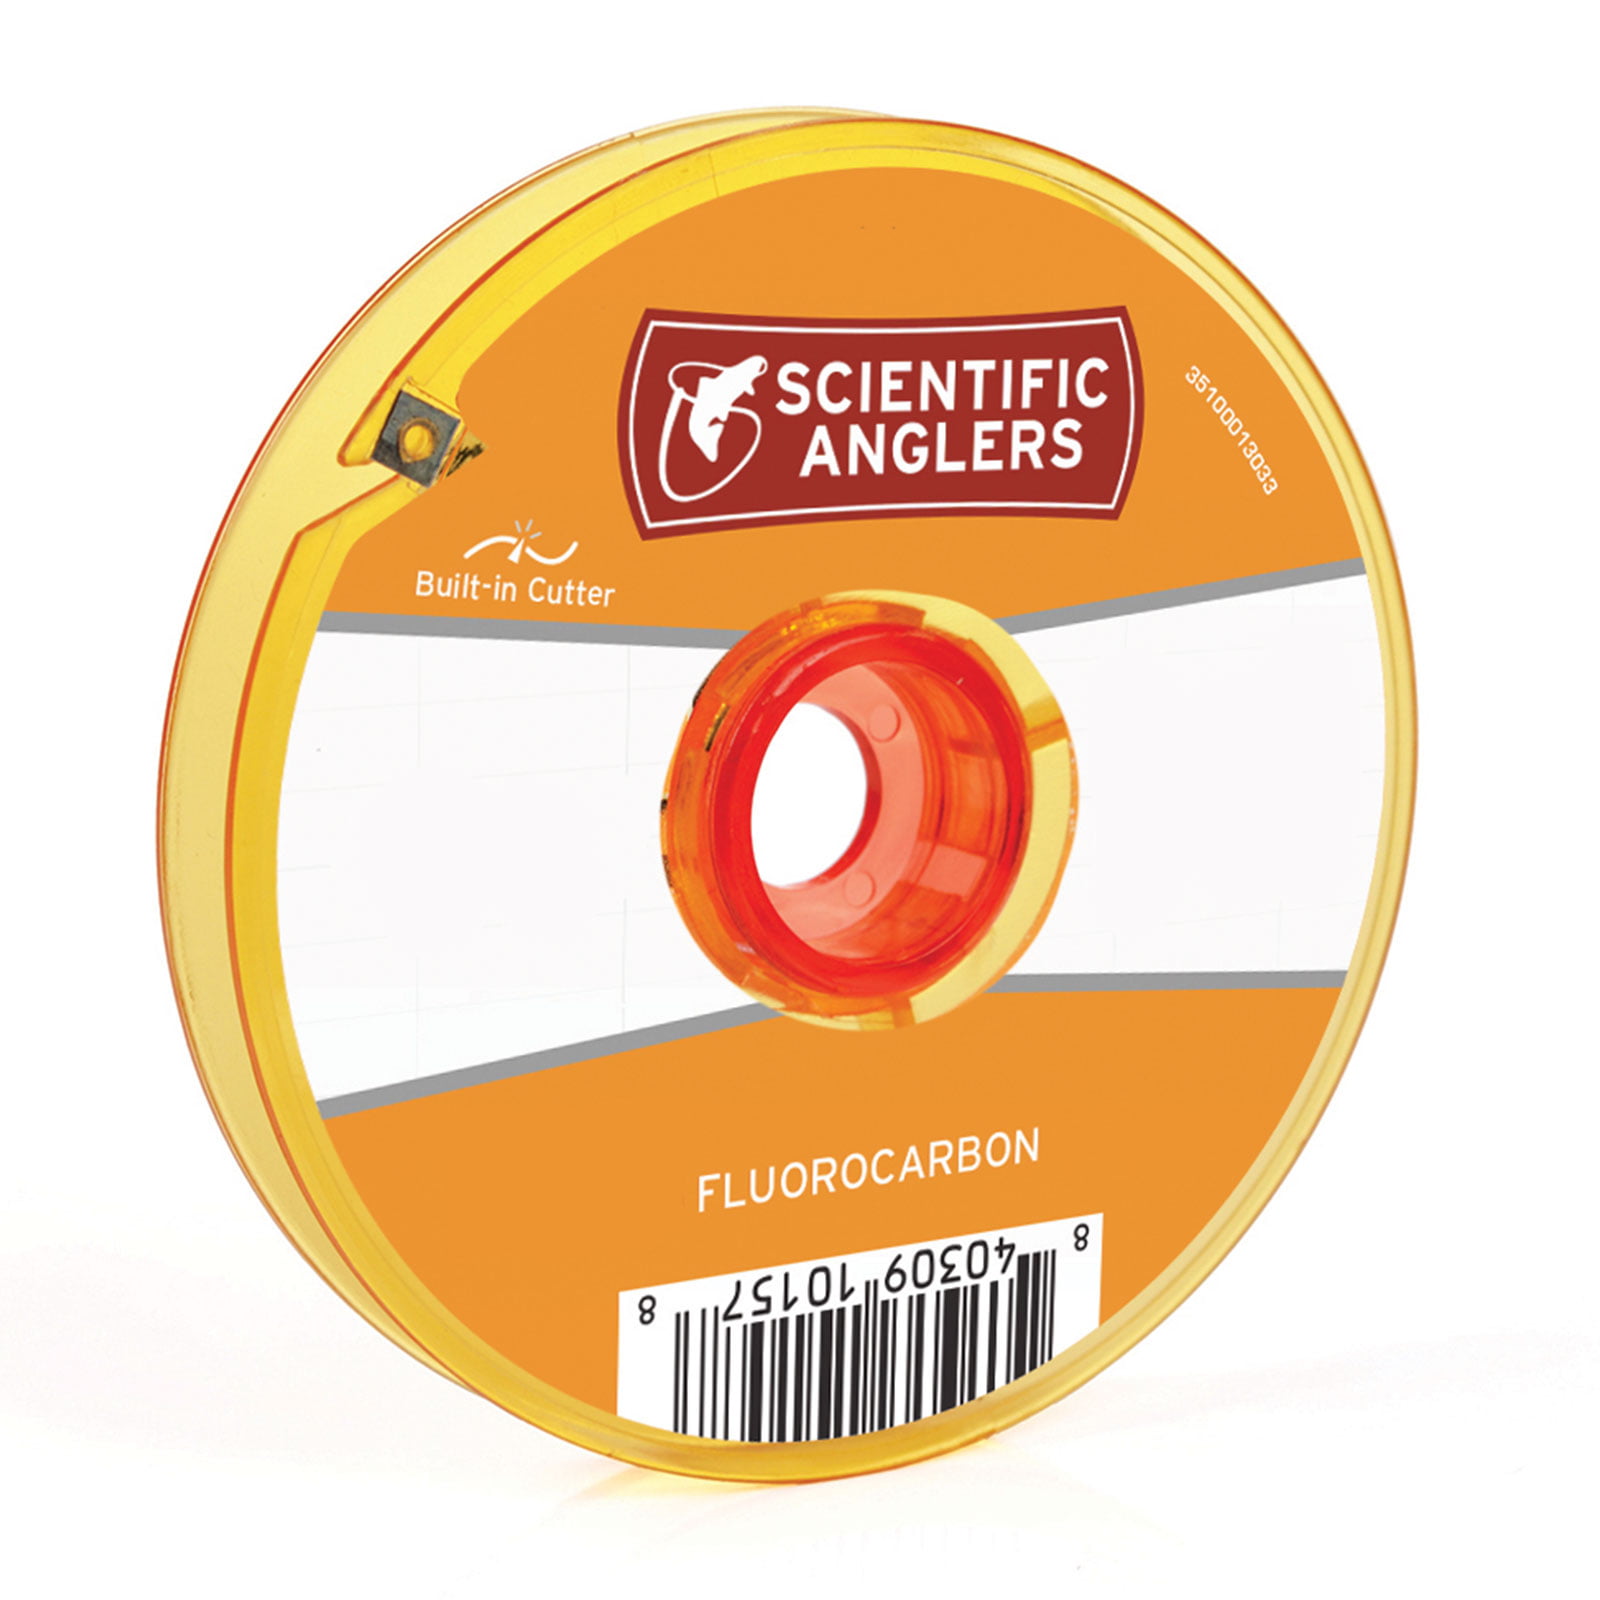 Scientific Anglers Fluorocarbon Tippet 25lb 27.3 yd 25m spool  built in cutter 